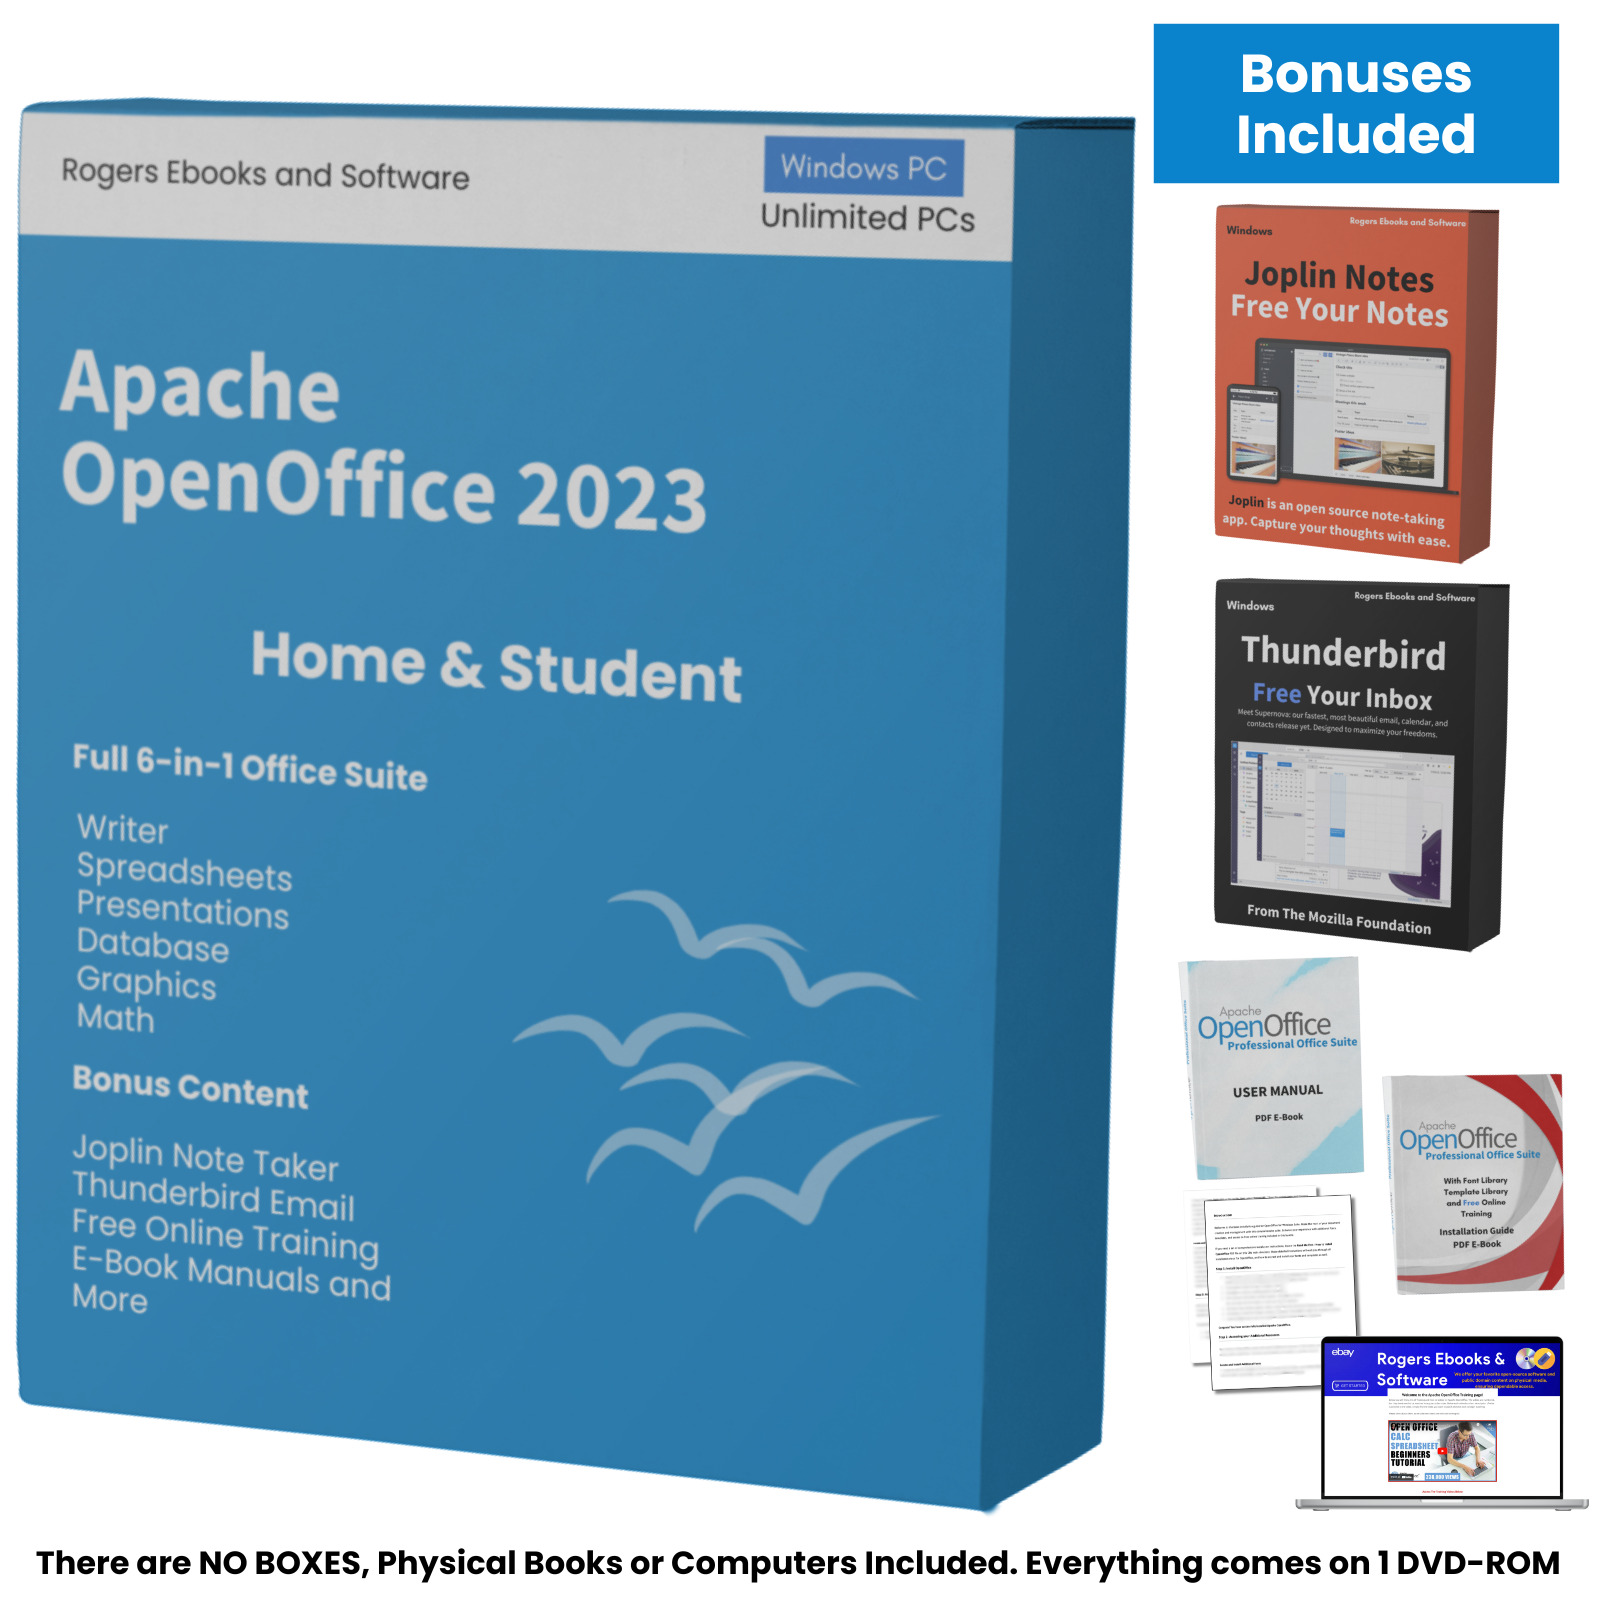 Open Office 2023 Home & Student Edition Full Version DVD Lifetime for Windows PC